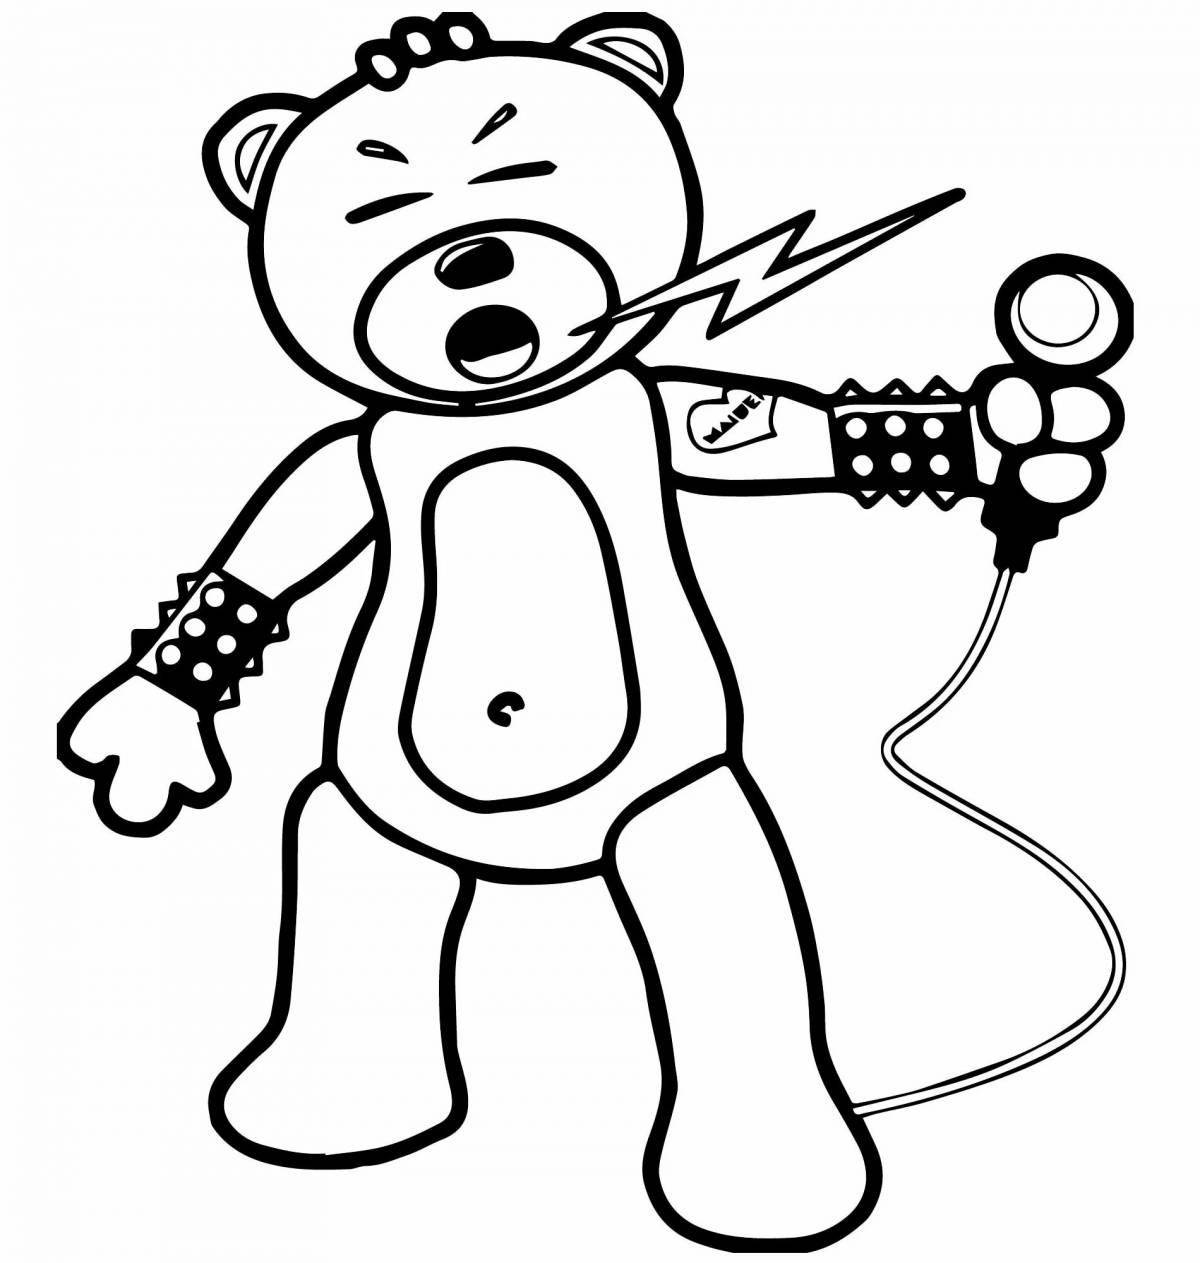 Coloring page wild singer for kids